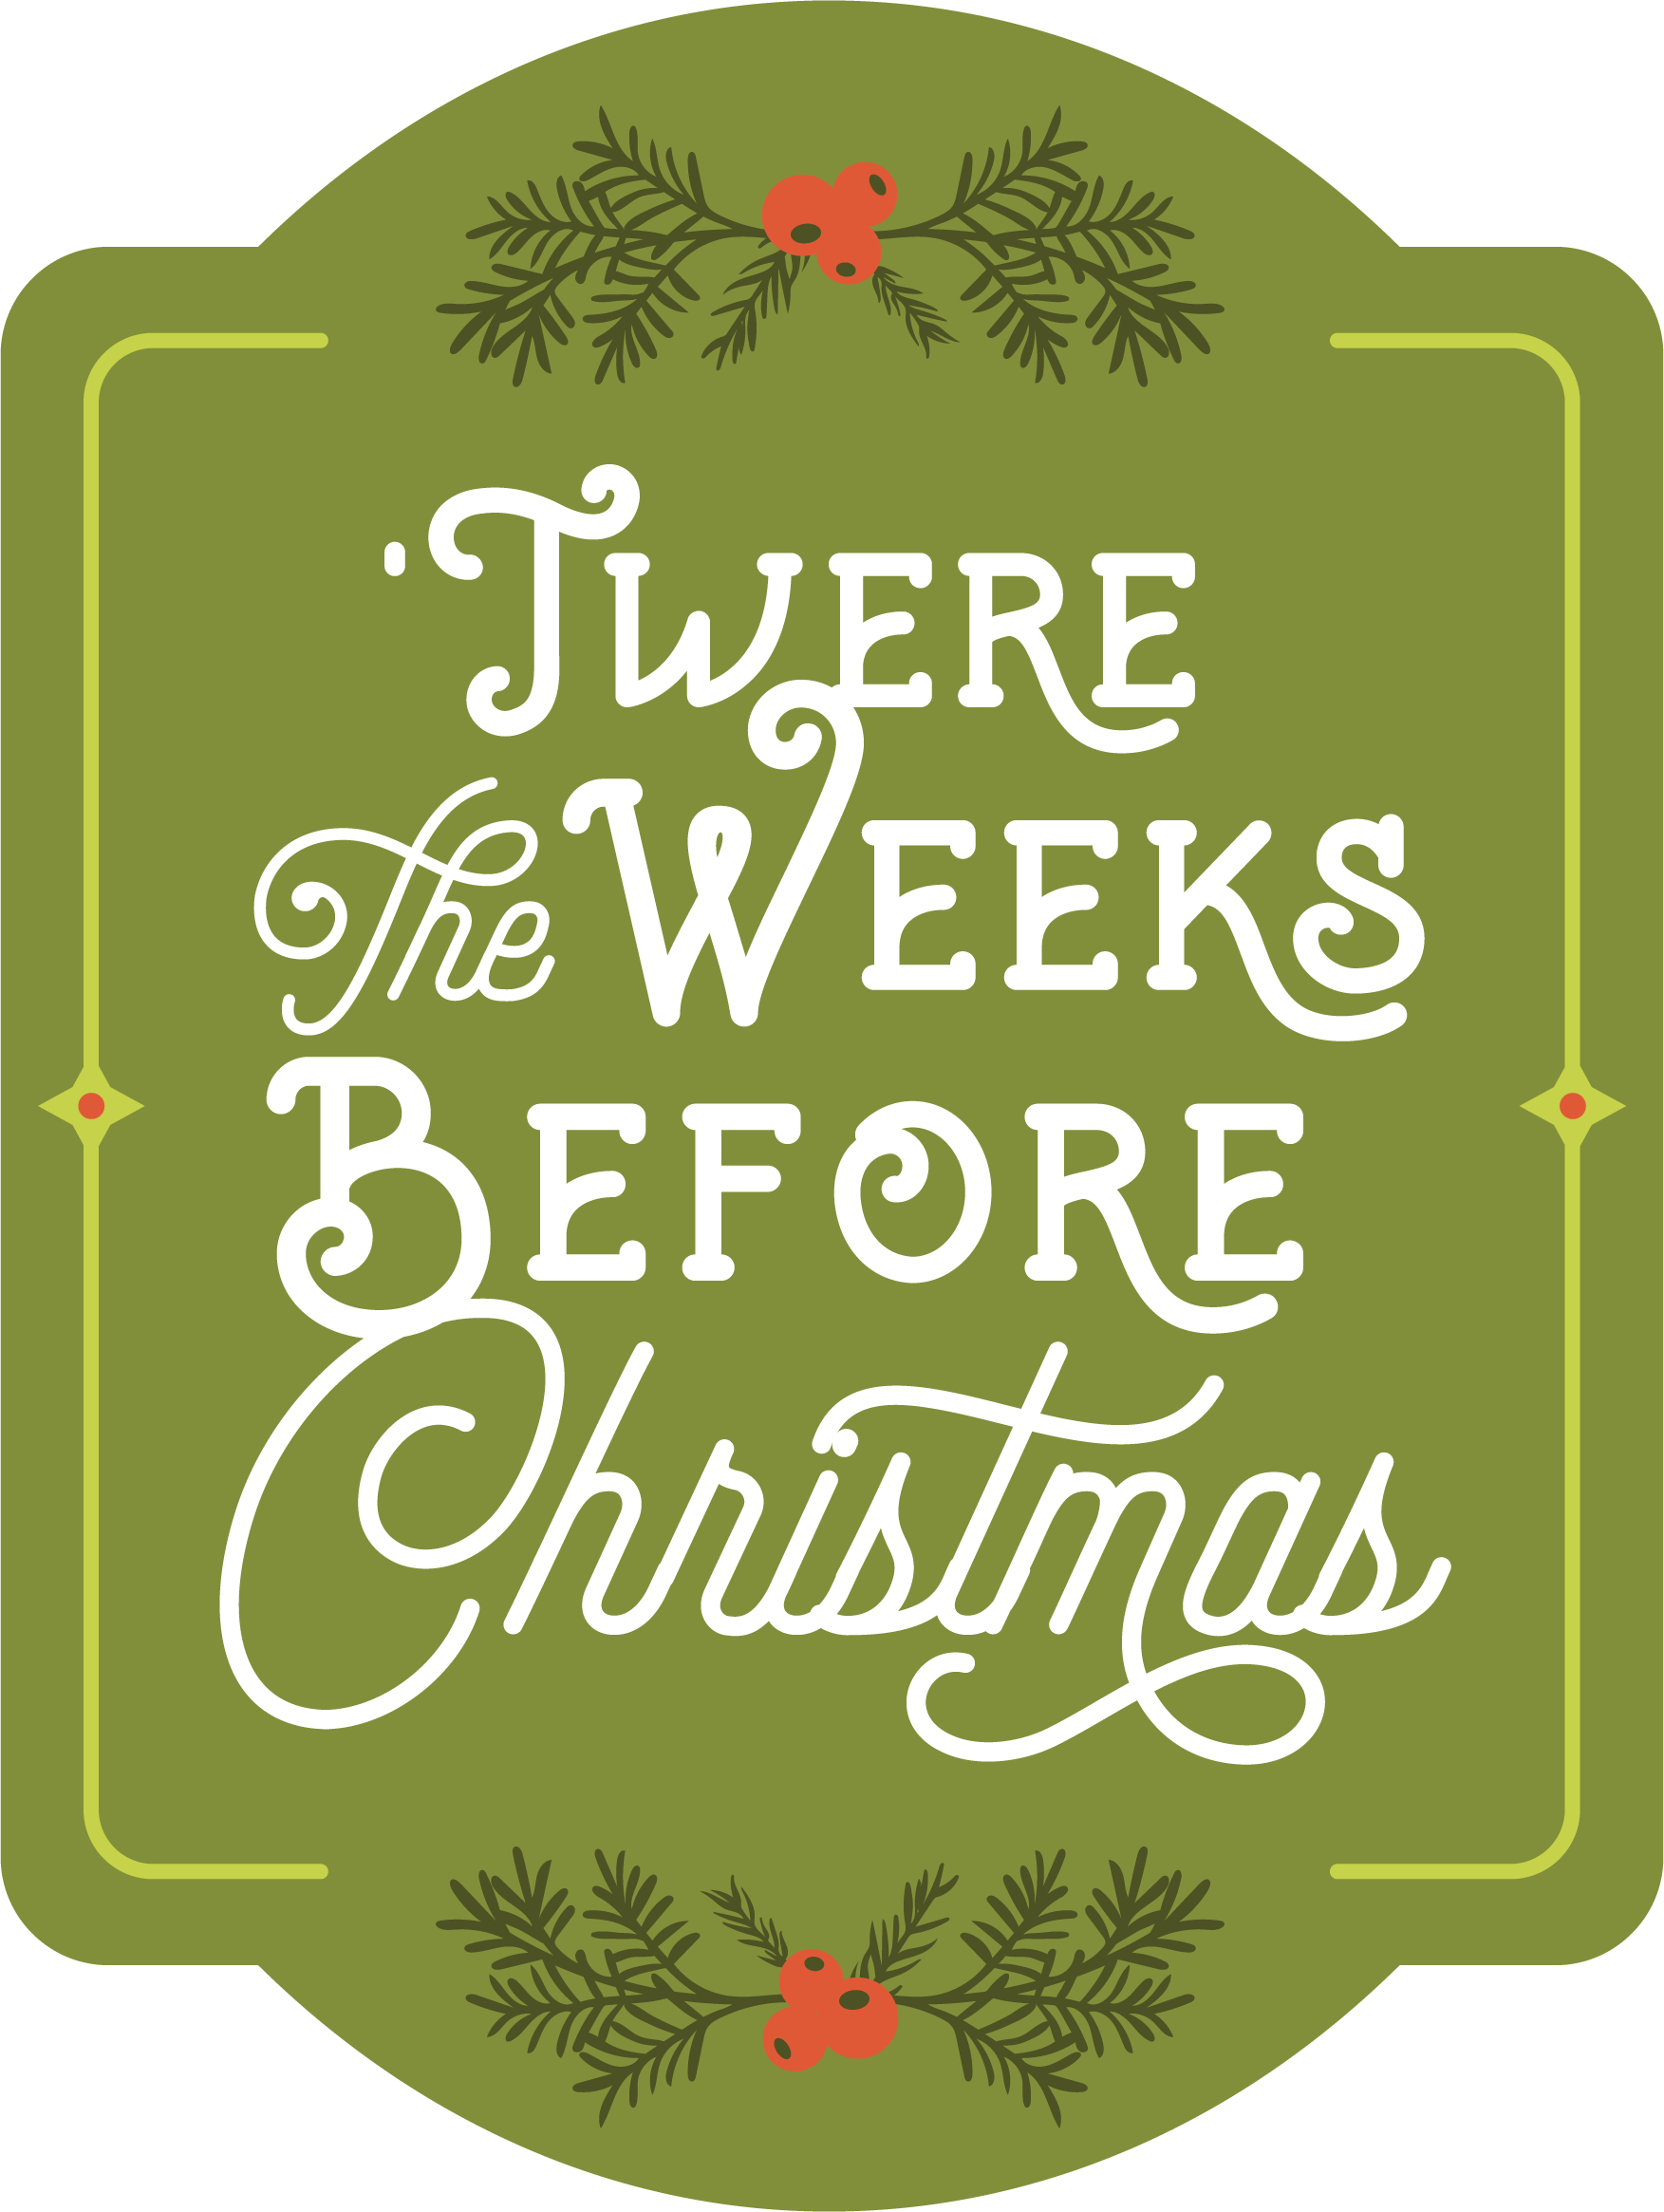 McMinnville Downtown Association's 'Twere The Weeks Before Christmas